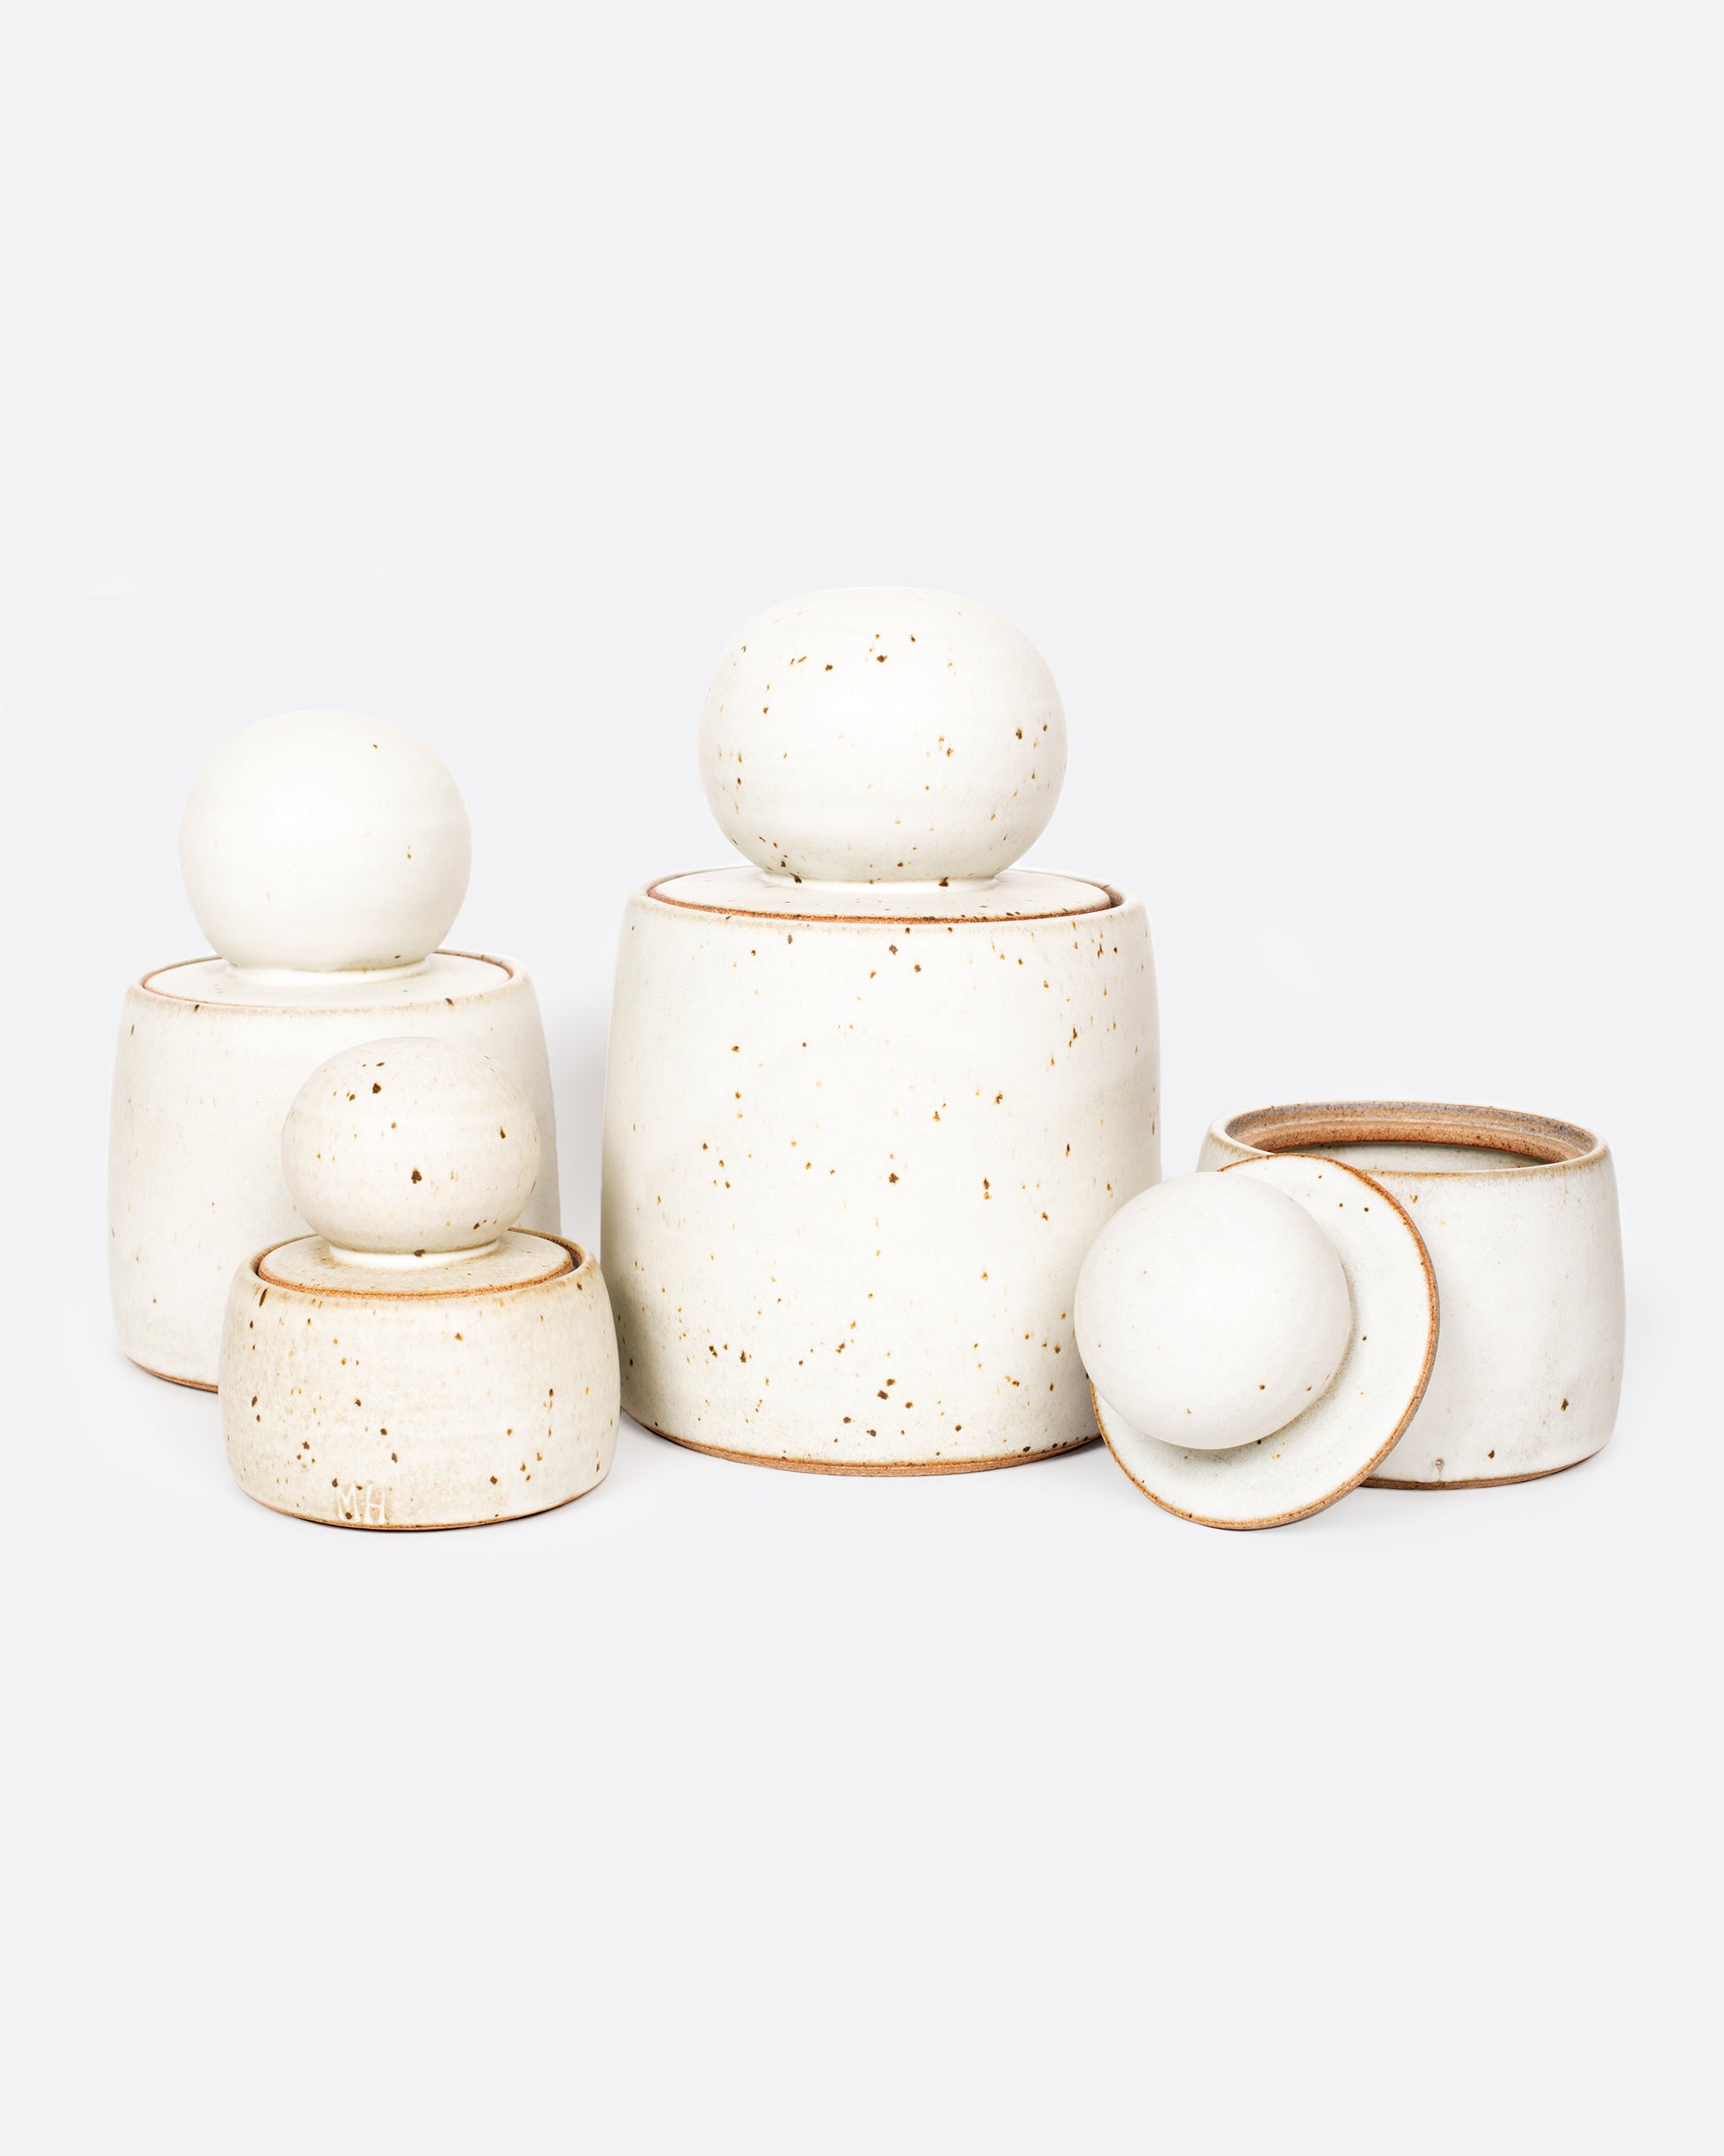 These lidded canisters come in several sizes and make a lovely set or individual containers that are perfect for anything from cookies to q-tips.